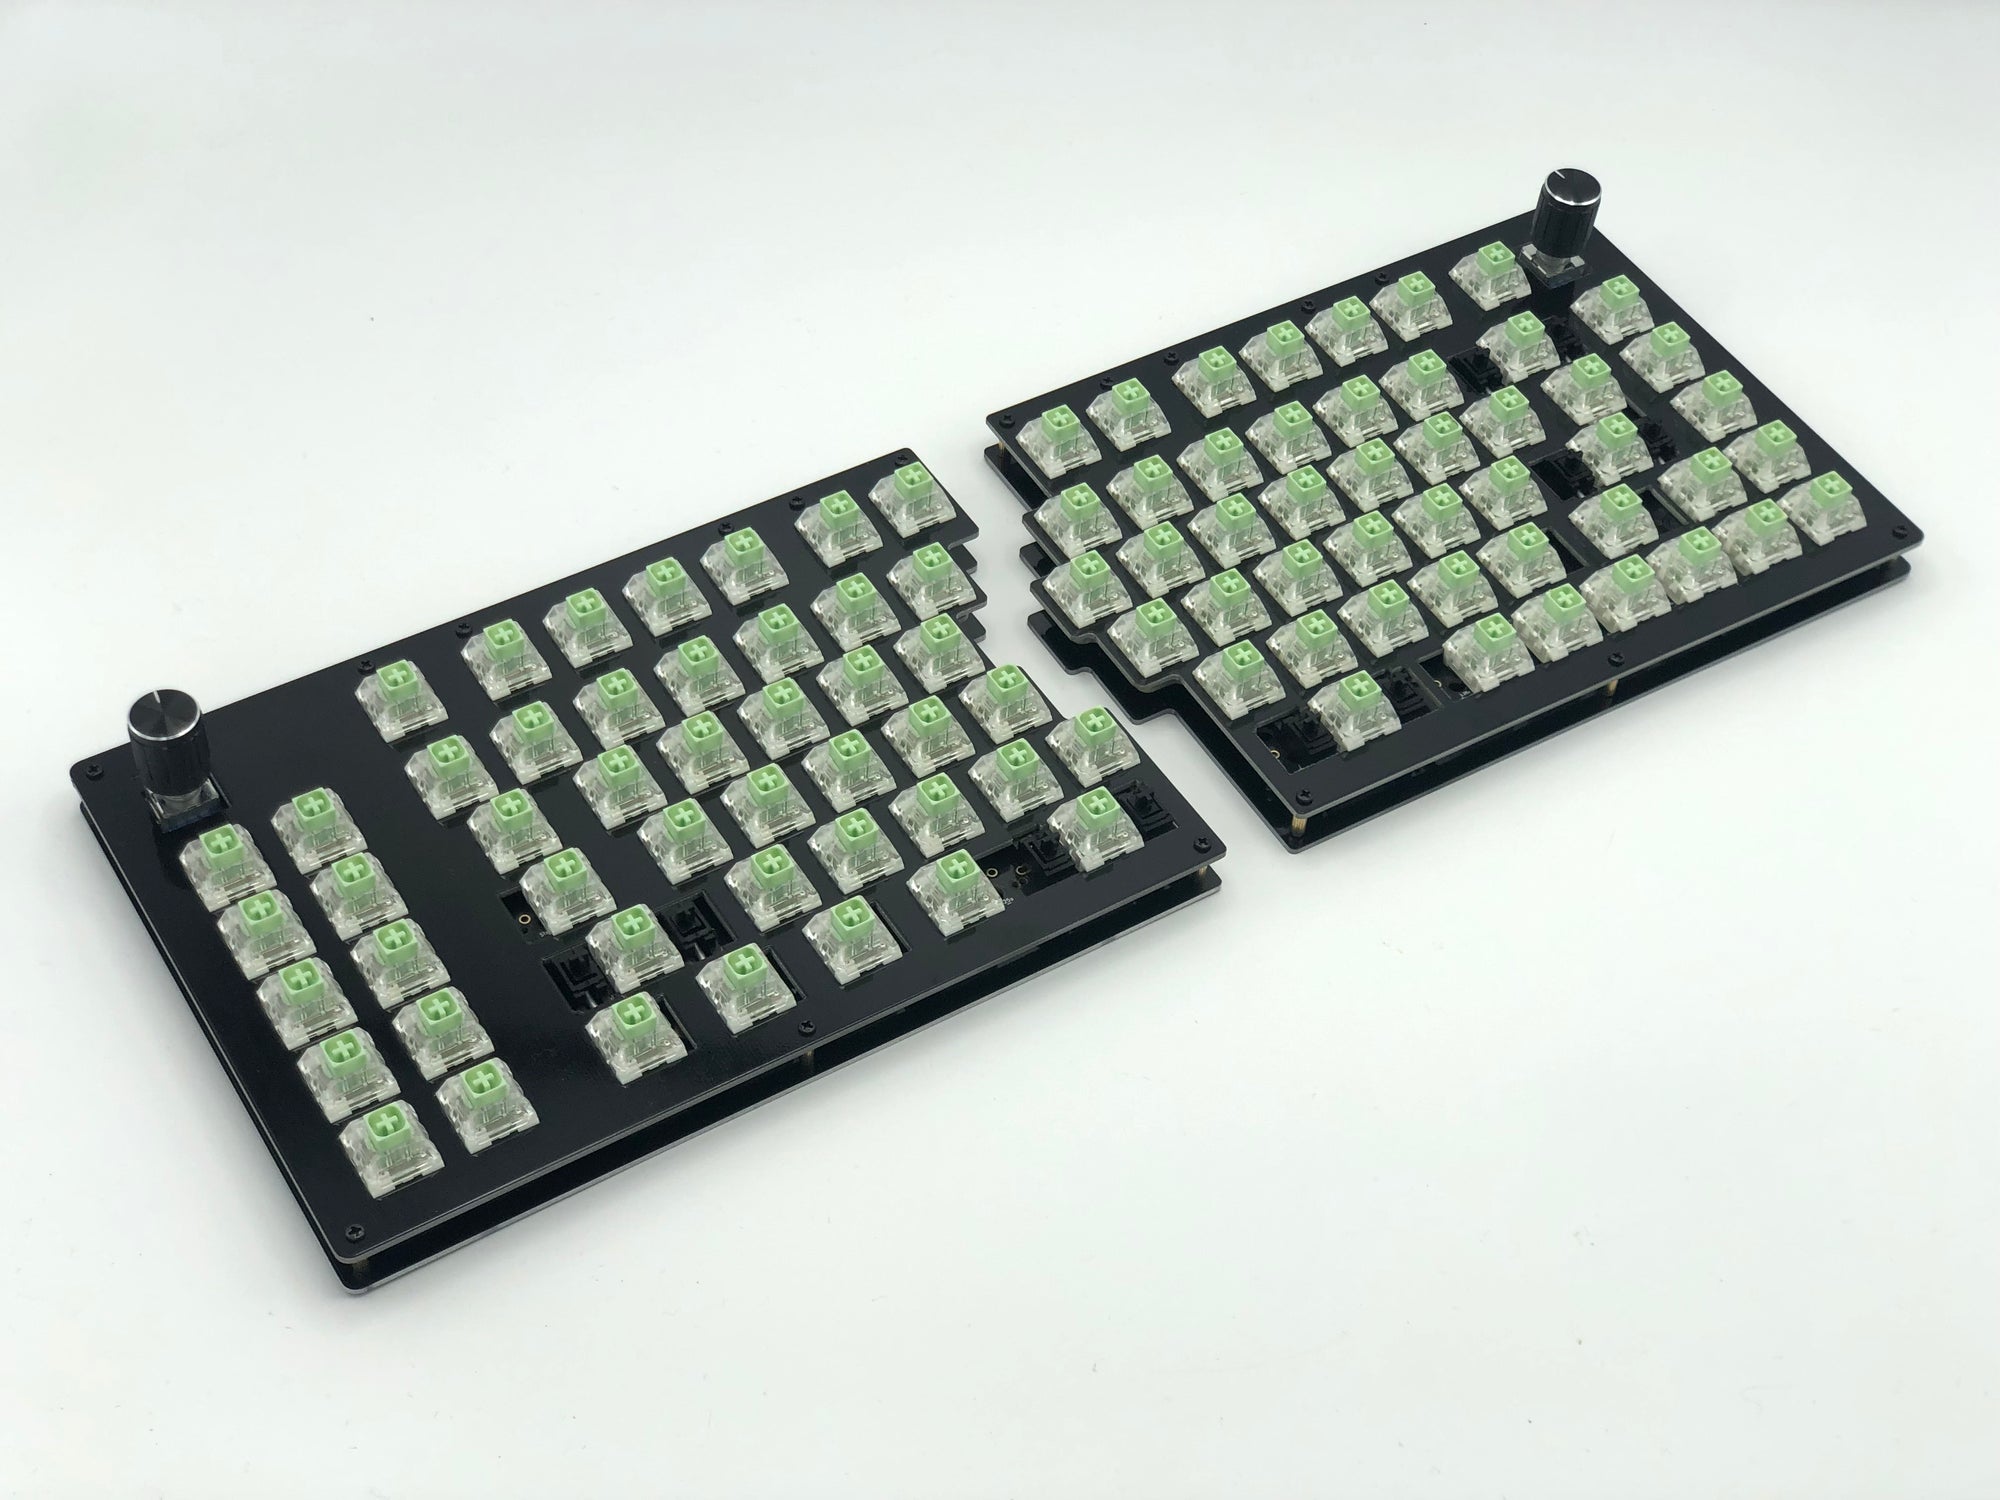 Sinc keyboard with Box Jade switches and a rotary encoder in the outer corners of each half and no keycaps.